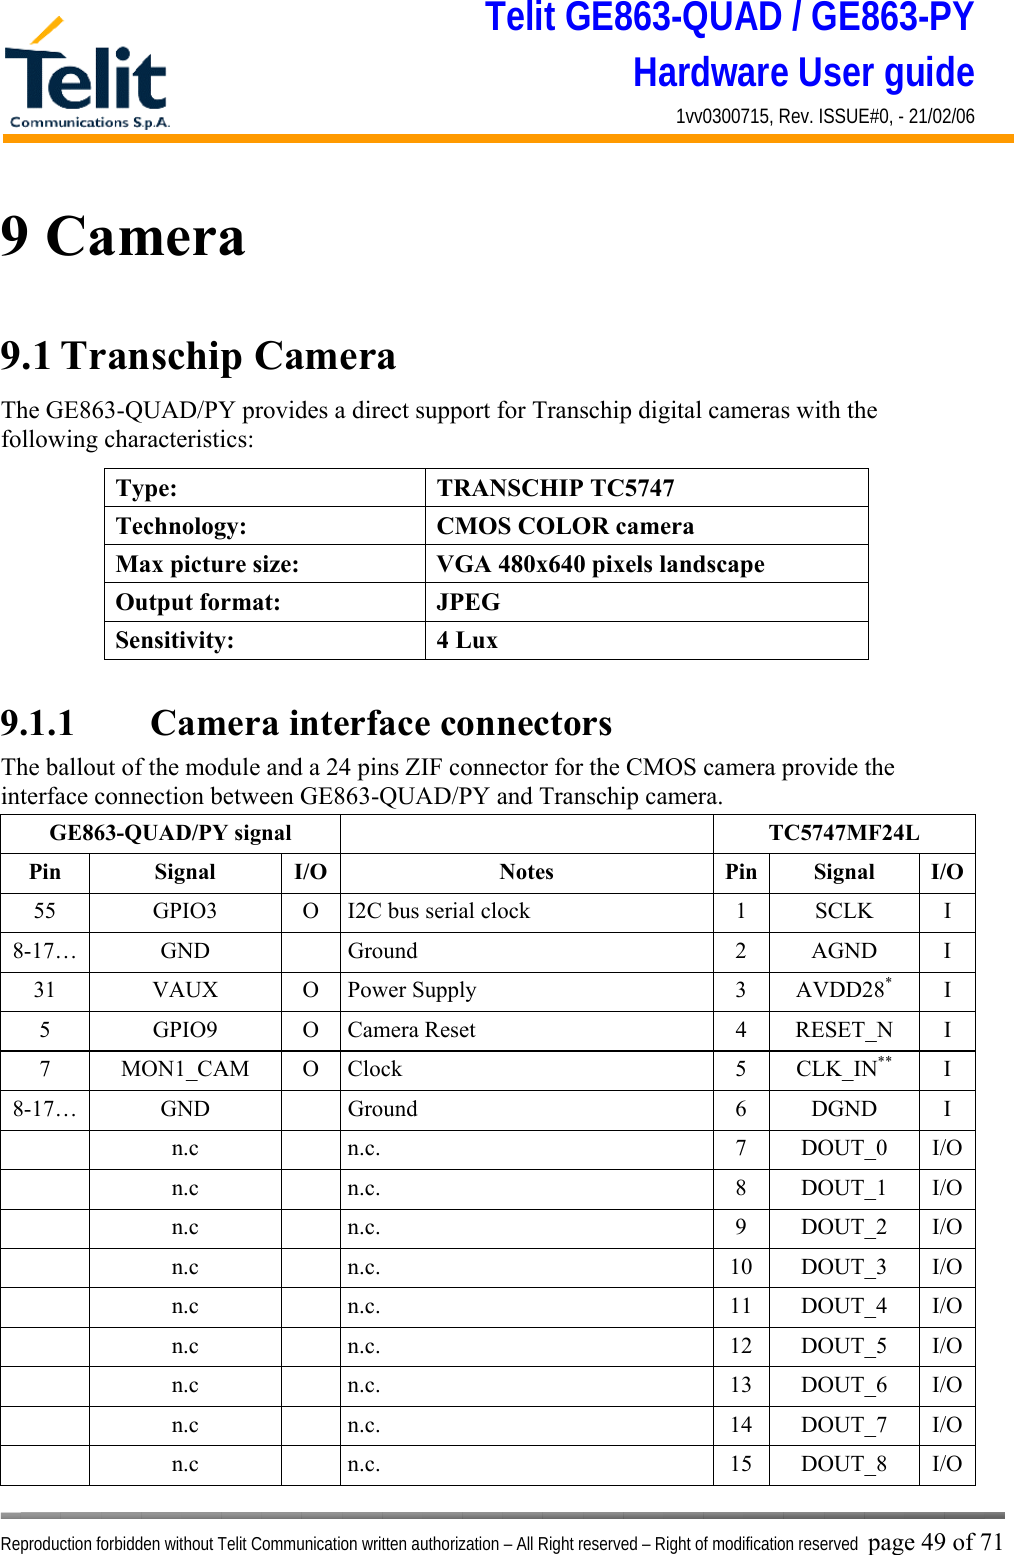 Telit GE863-QUAD / GE863-PY Hardware User guide 1vv0300715, Rev. ISSUE#0, - 21/02/06    Reproduction forbidden without Telit Communication written authorization – All Right reserved – Right of modification reserved page 49 of 71 9 Camera 9.1 Transchip Camera  The GE863-QUAD/PY provides a direct support for Transchip digital cameras with the following characteristics:  9.1.1   Camera interface connectors The ballout of the module and a 24 pins ZIF connector for the CMOS camera provide the interface connection between GE863-QUAD/PY and Transchip camera. GE863-QUAD/PY signal    TC5747MF24L Pin Signal I/O  Notes  Pin Signal I/O55  GPIO3  O  I2C bus serial clock  1  SCLK  I 8-17… GND   Ground  2 AGND I 31 VAUX O Power Supply  3 AVDD28* I 5 GPIO9 O Camera Reset  4 RESET_N I 7 MON1_CAM O Clock  5 CLK_IN** I 8-17… GND   Ground  6 DGND I  n.c  n.c.  7 DOUT_0 I/O  n.c  n.c.  8 DOUT_1  I/O  n.c  n.c.  9 DOUT_2 I/O  n.c  n.c.  10 DOUT_3 I/O  n.c  n.c.  11 DOUT_4 I/O  n.c  n.c.  12 DOUT_5 I/O  n.c  n.c.  13 DOUT_6 I/O  n.c  n.c.  14 DOUT_7 I/O  n.c  n.c.  15 DOUT_8 I/O Type: TRANSCHIP TC5747 Technology:  CMOS COLOR camera Max picture size:  VGA 480x640 pixels landscape Output format:  JPEG Sensitivity: 4 Lux 